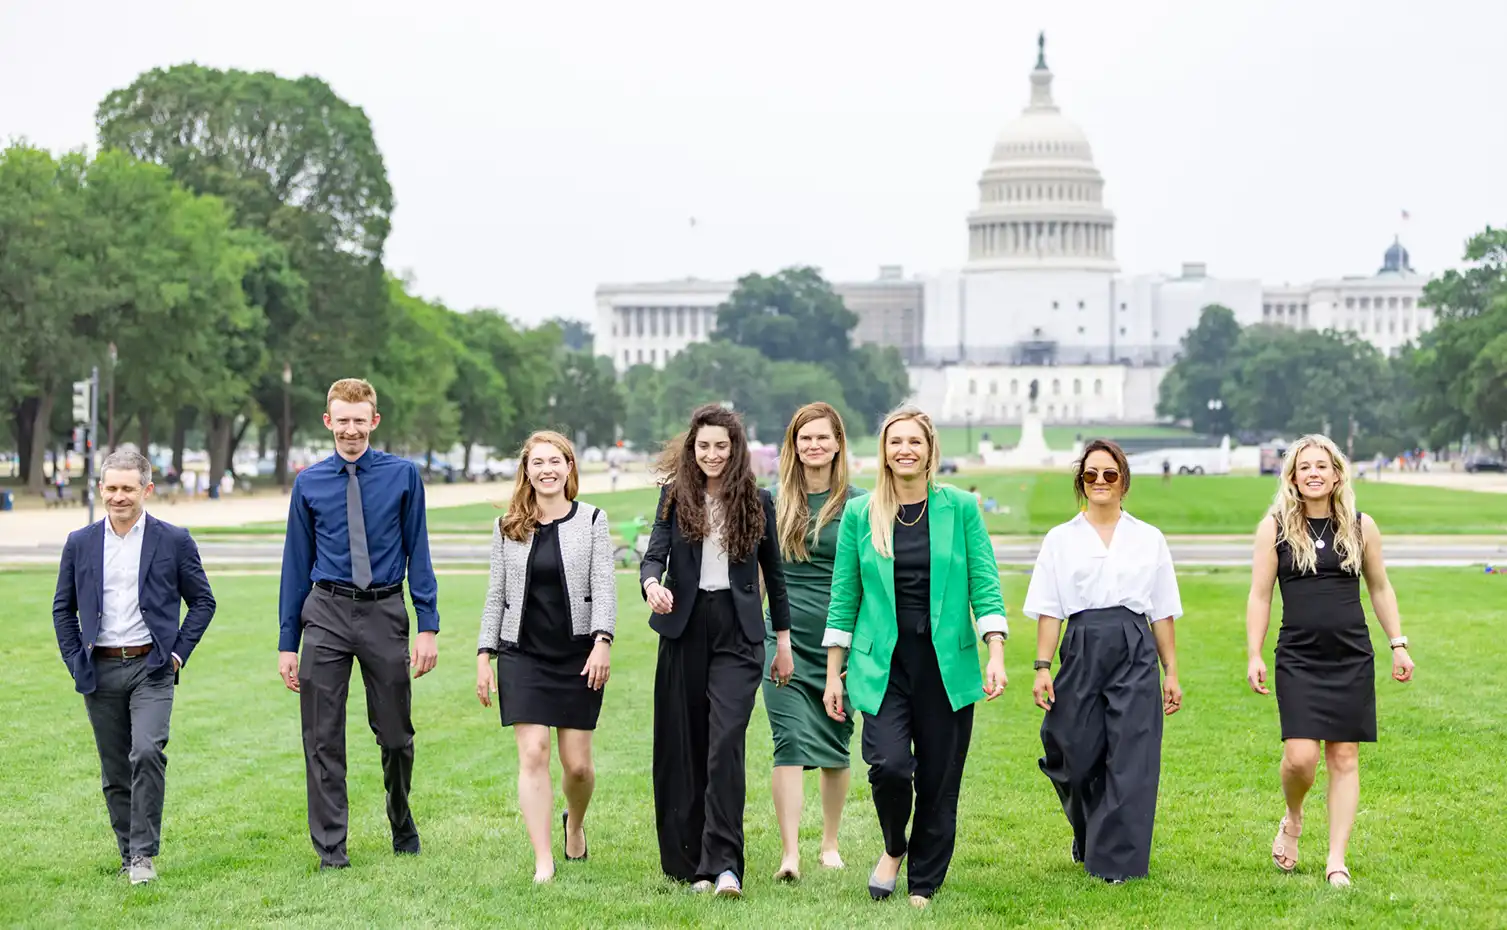 Athletes and advocates from POW (a long-time grant recipient of the Environment Foundation) at a recent summit in DC where they spoke with lawmakers about clean energy infrastructure. ©Iz Motte